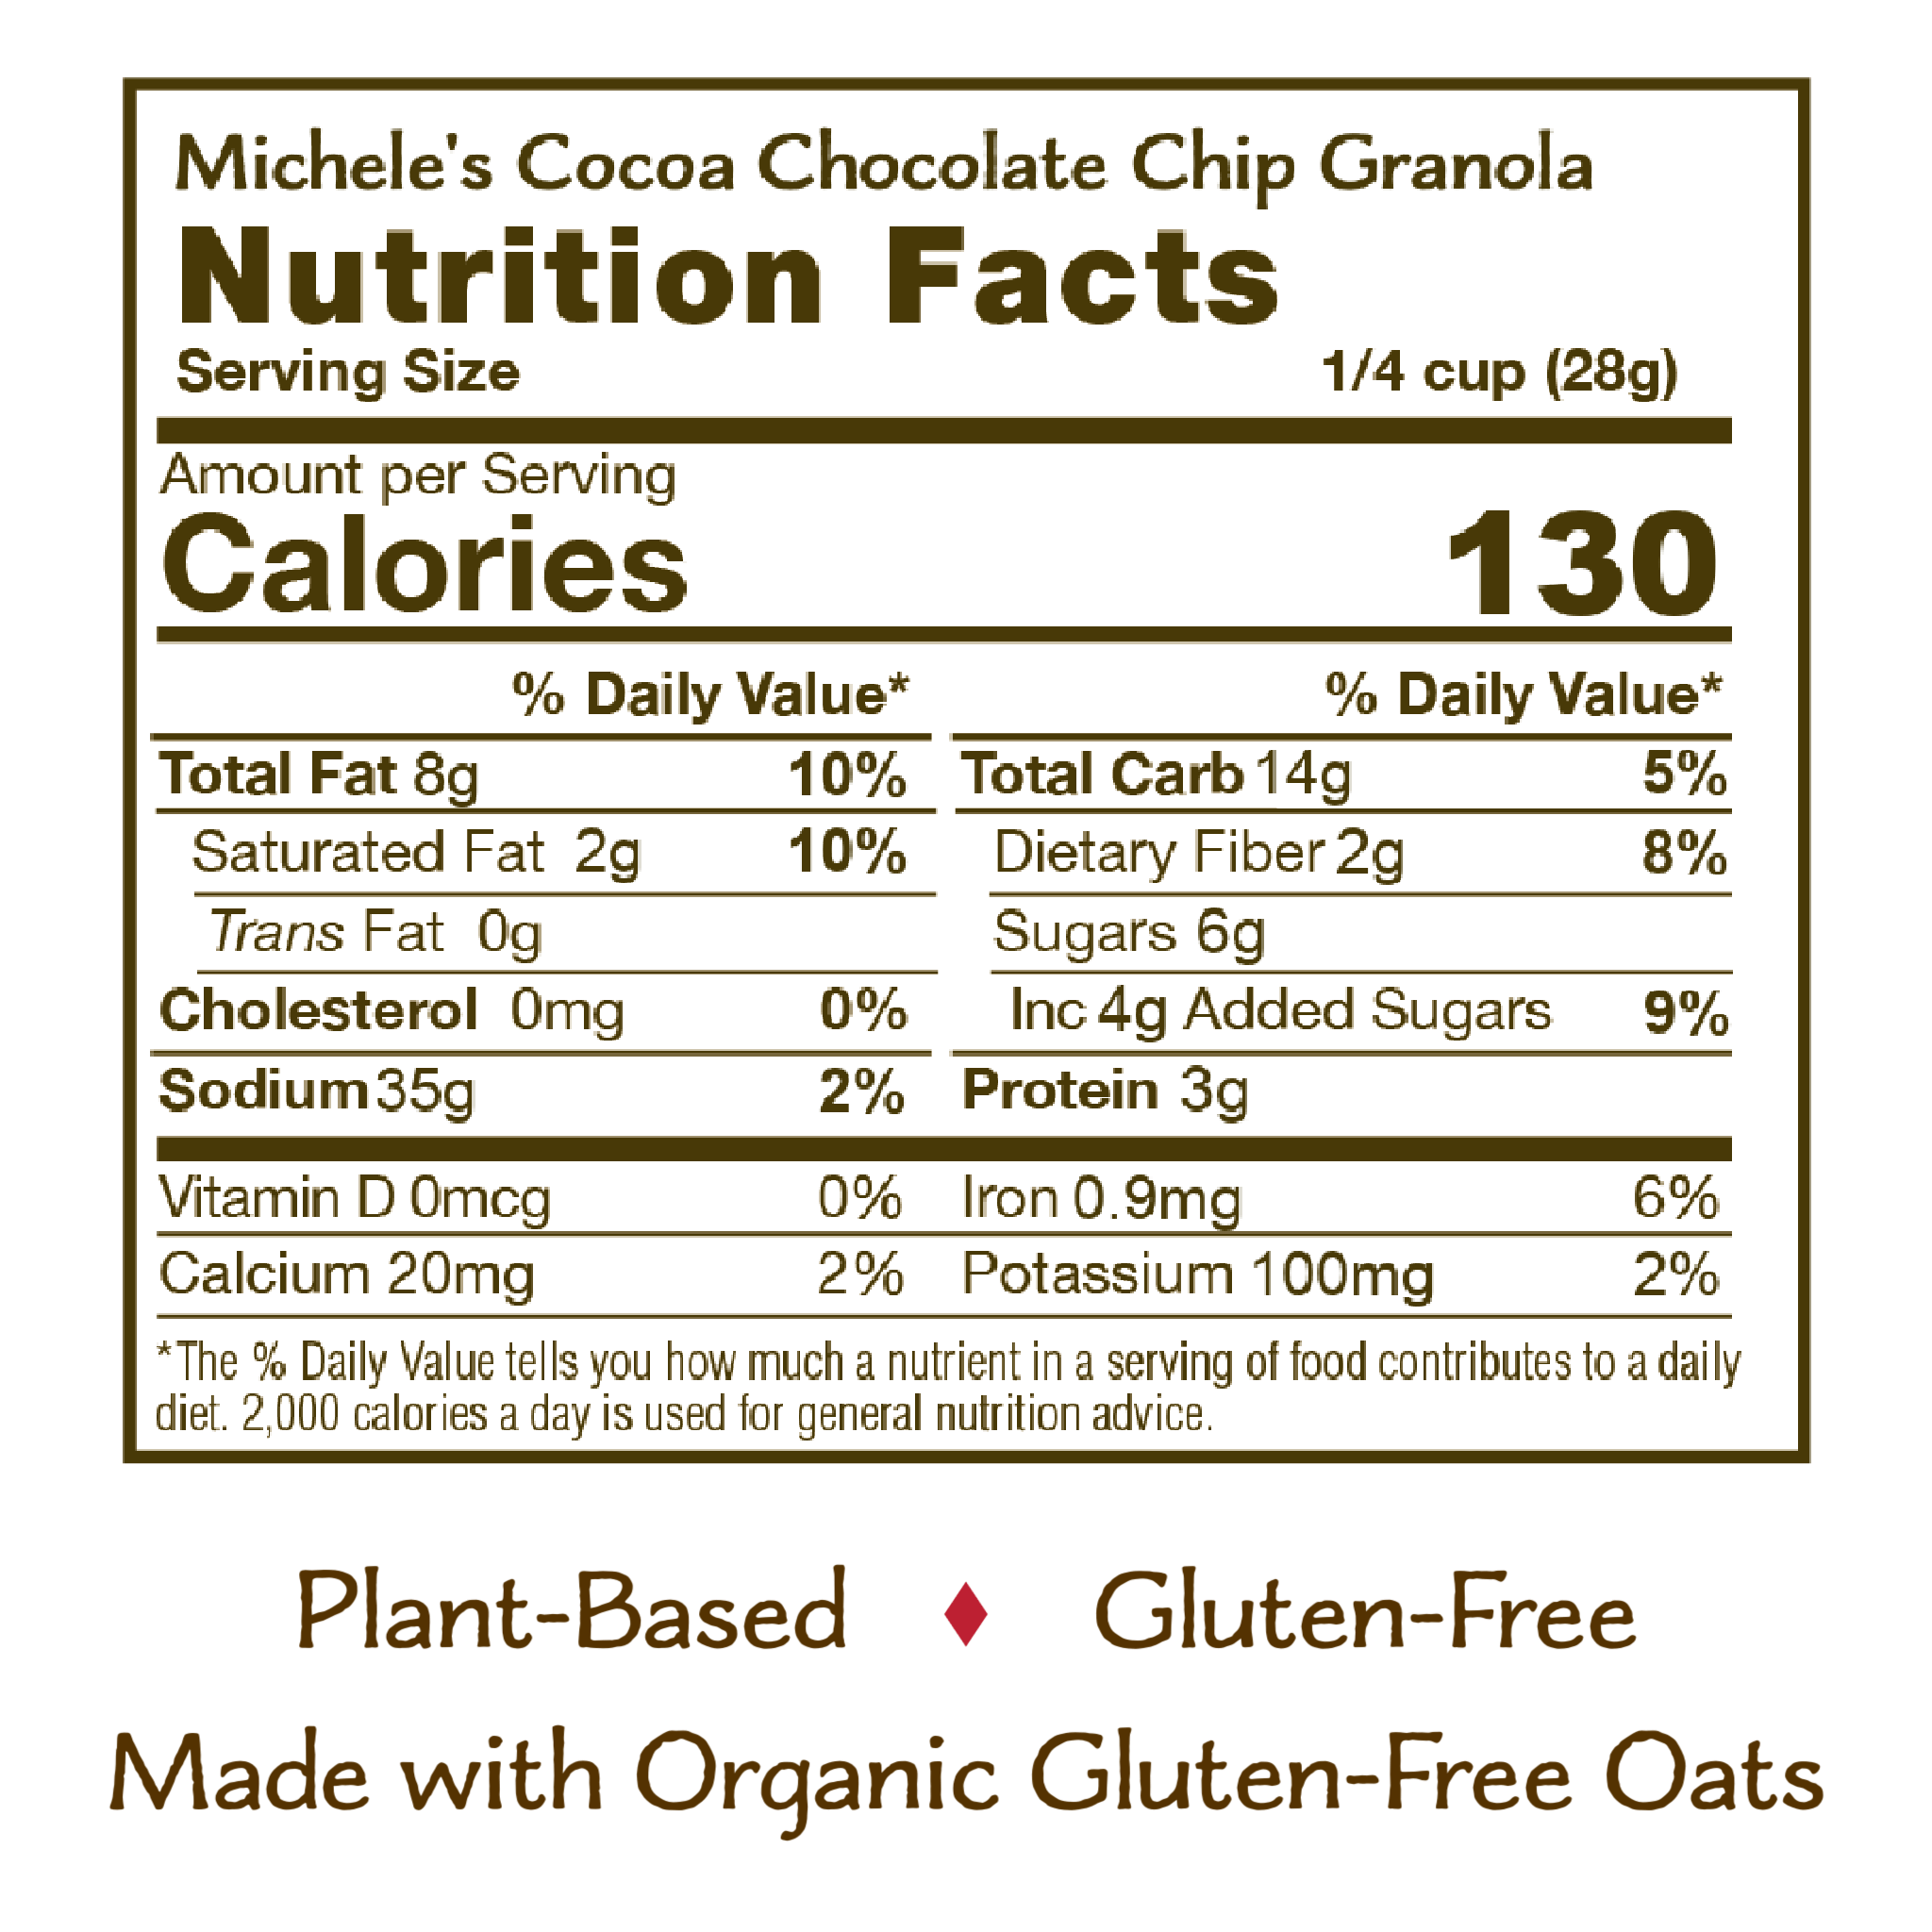 Nutrition panel for Cocoa Chocolate Chip Granola